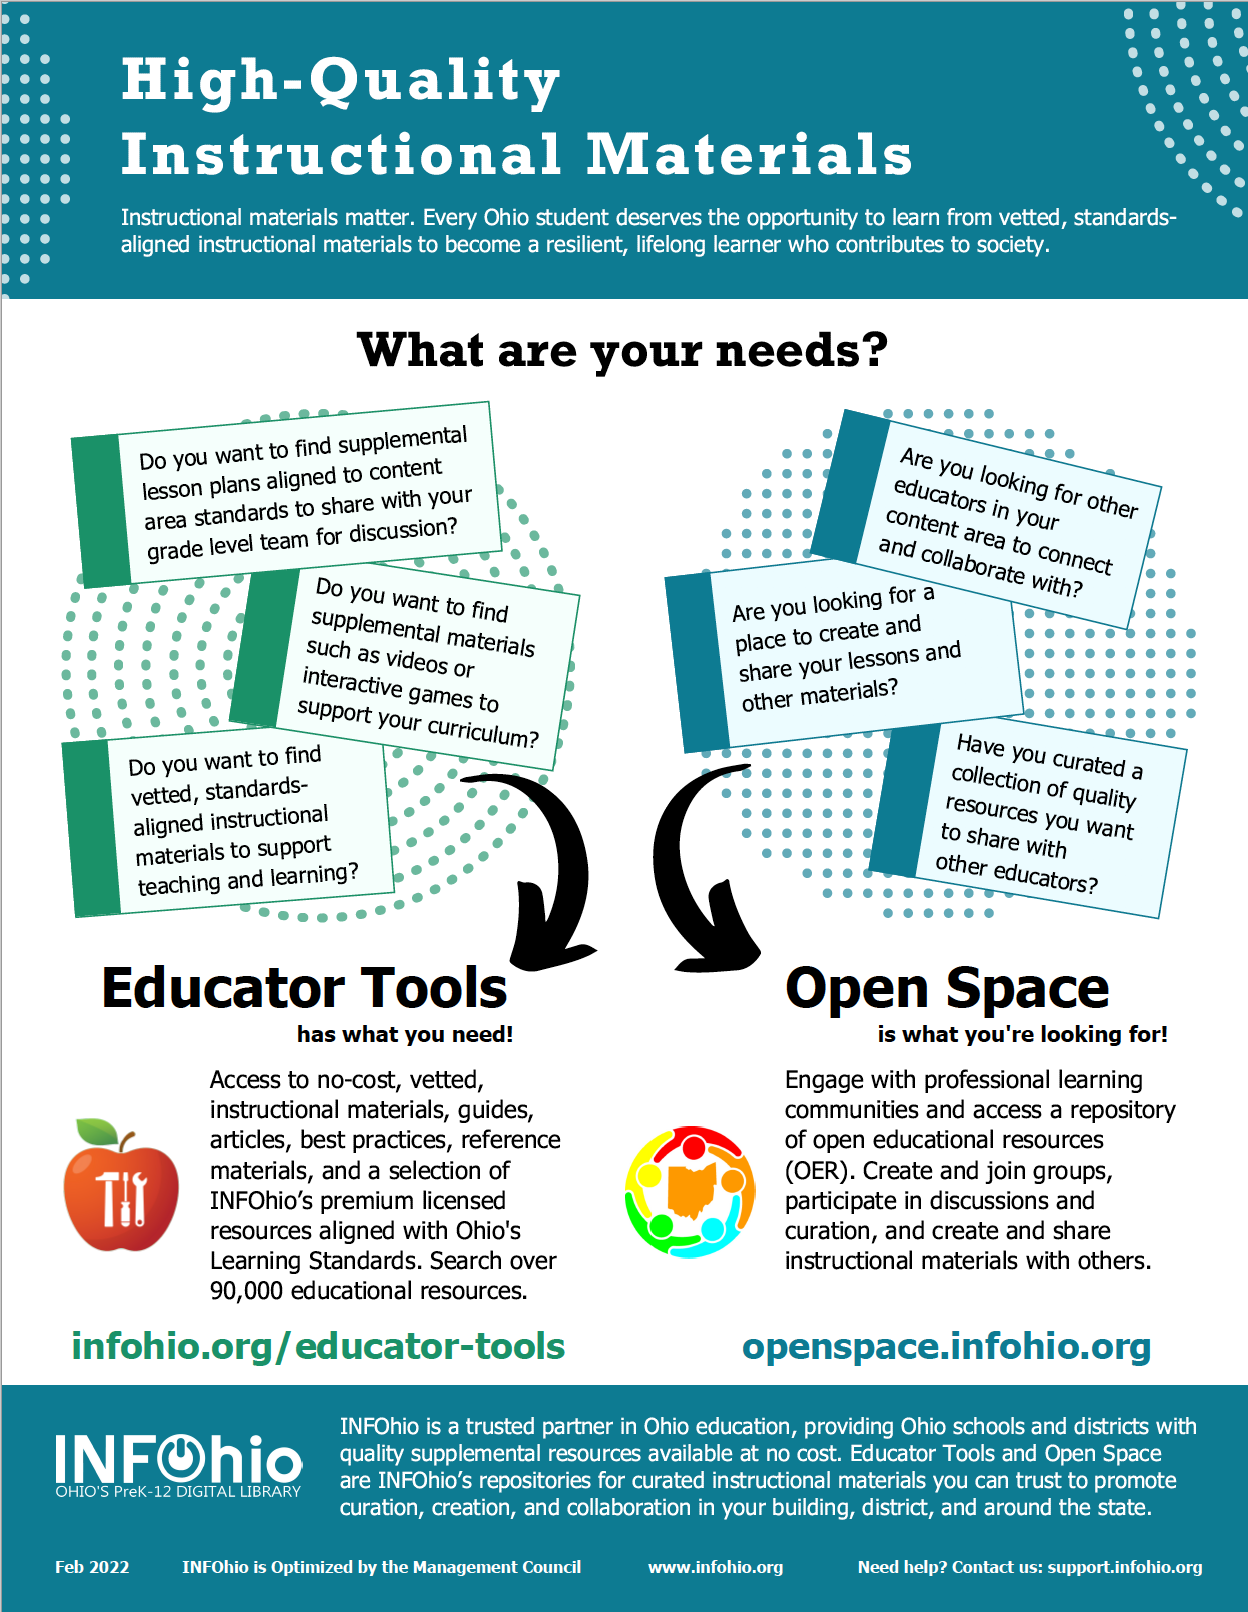 Platforms for Your Instructional Needs: Educator Tools and Open Space